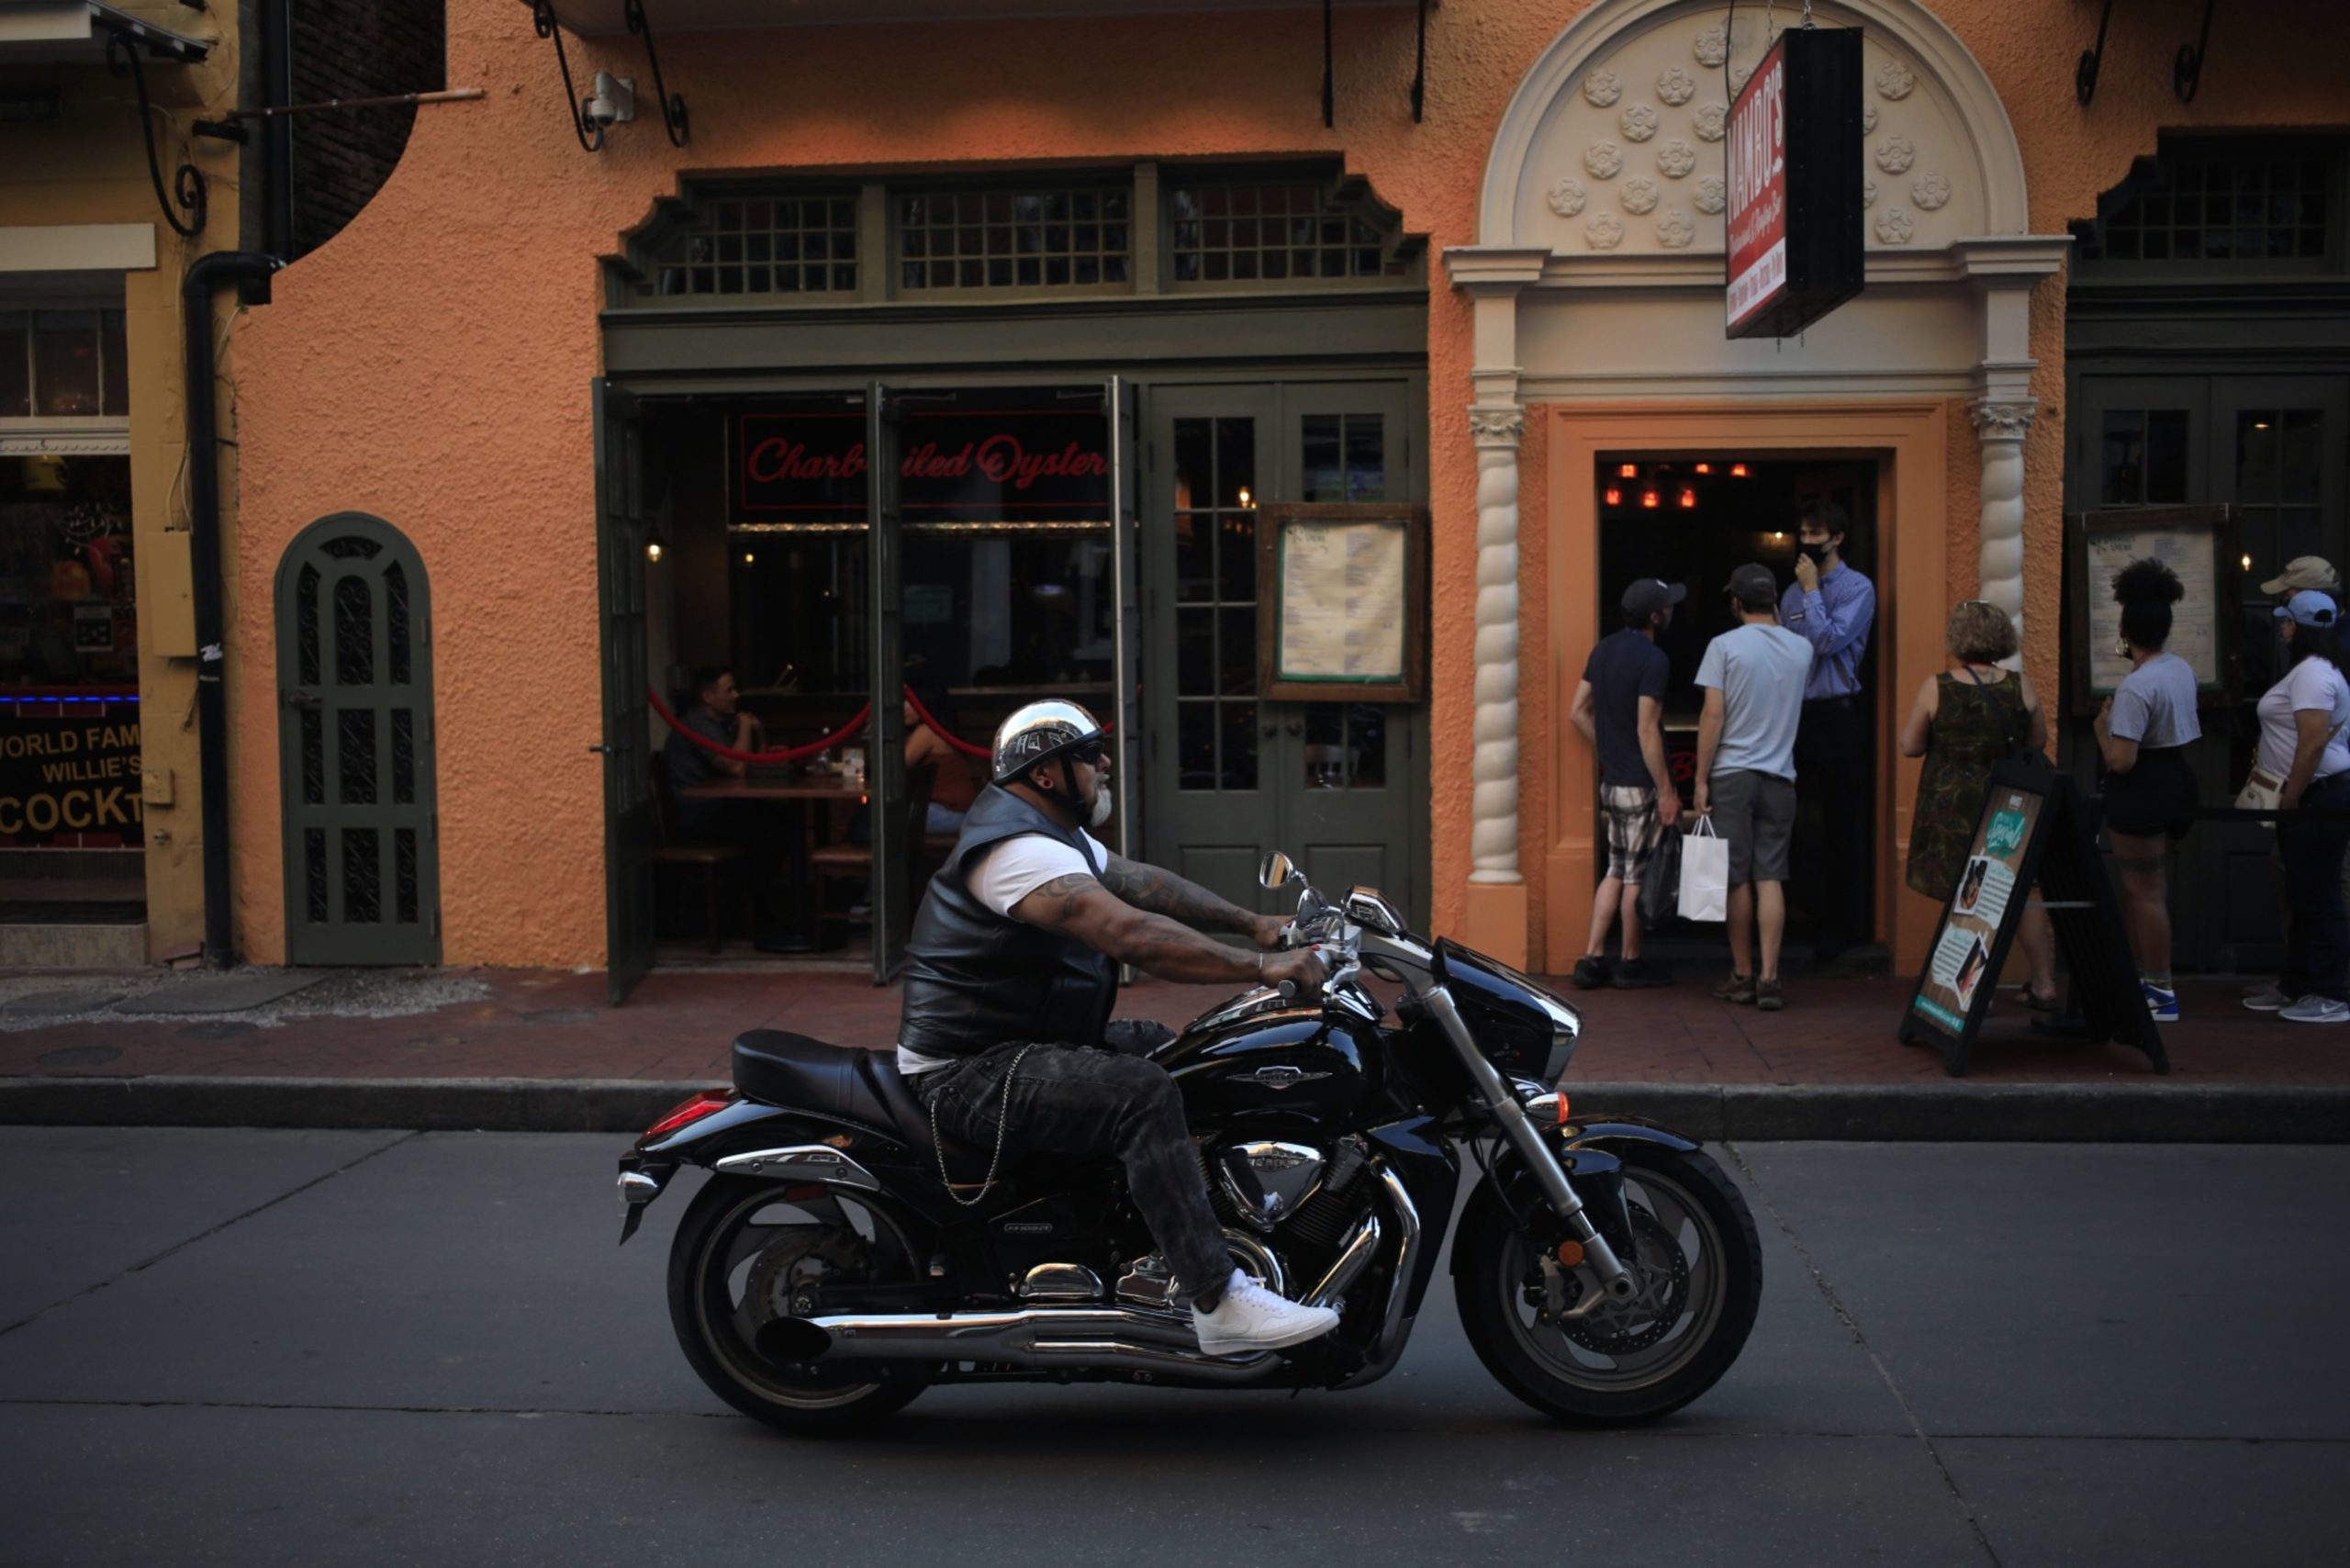 A person riding a motorcycle passes in front of customers standing in line to enter a restaurant on Bourbon Street in the French Quarter neighborhood in New Orleans, Louisiana, U.S., on Tuesday, April 20, 2021. Langer Research is releasing consumer comfort figures on April 22. Photographer: Luke Sharrett/Bloomberg